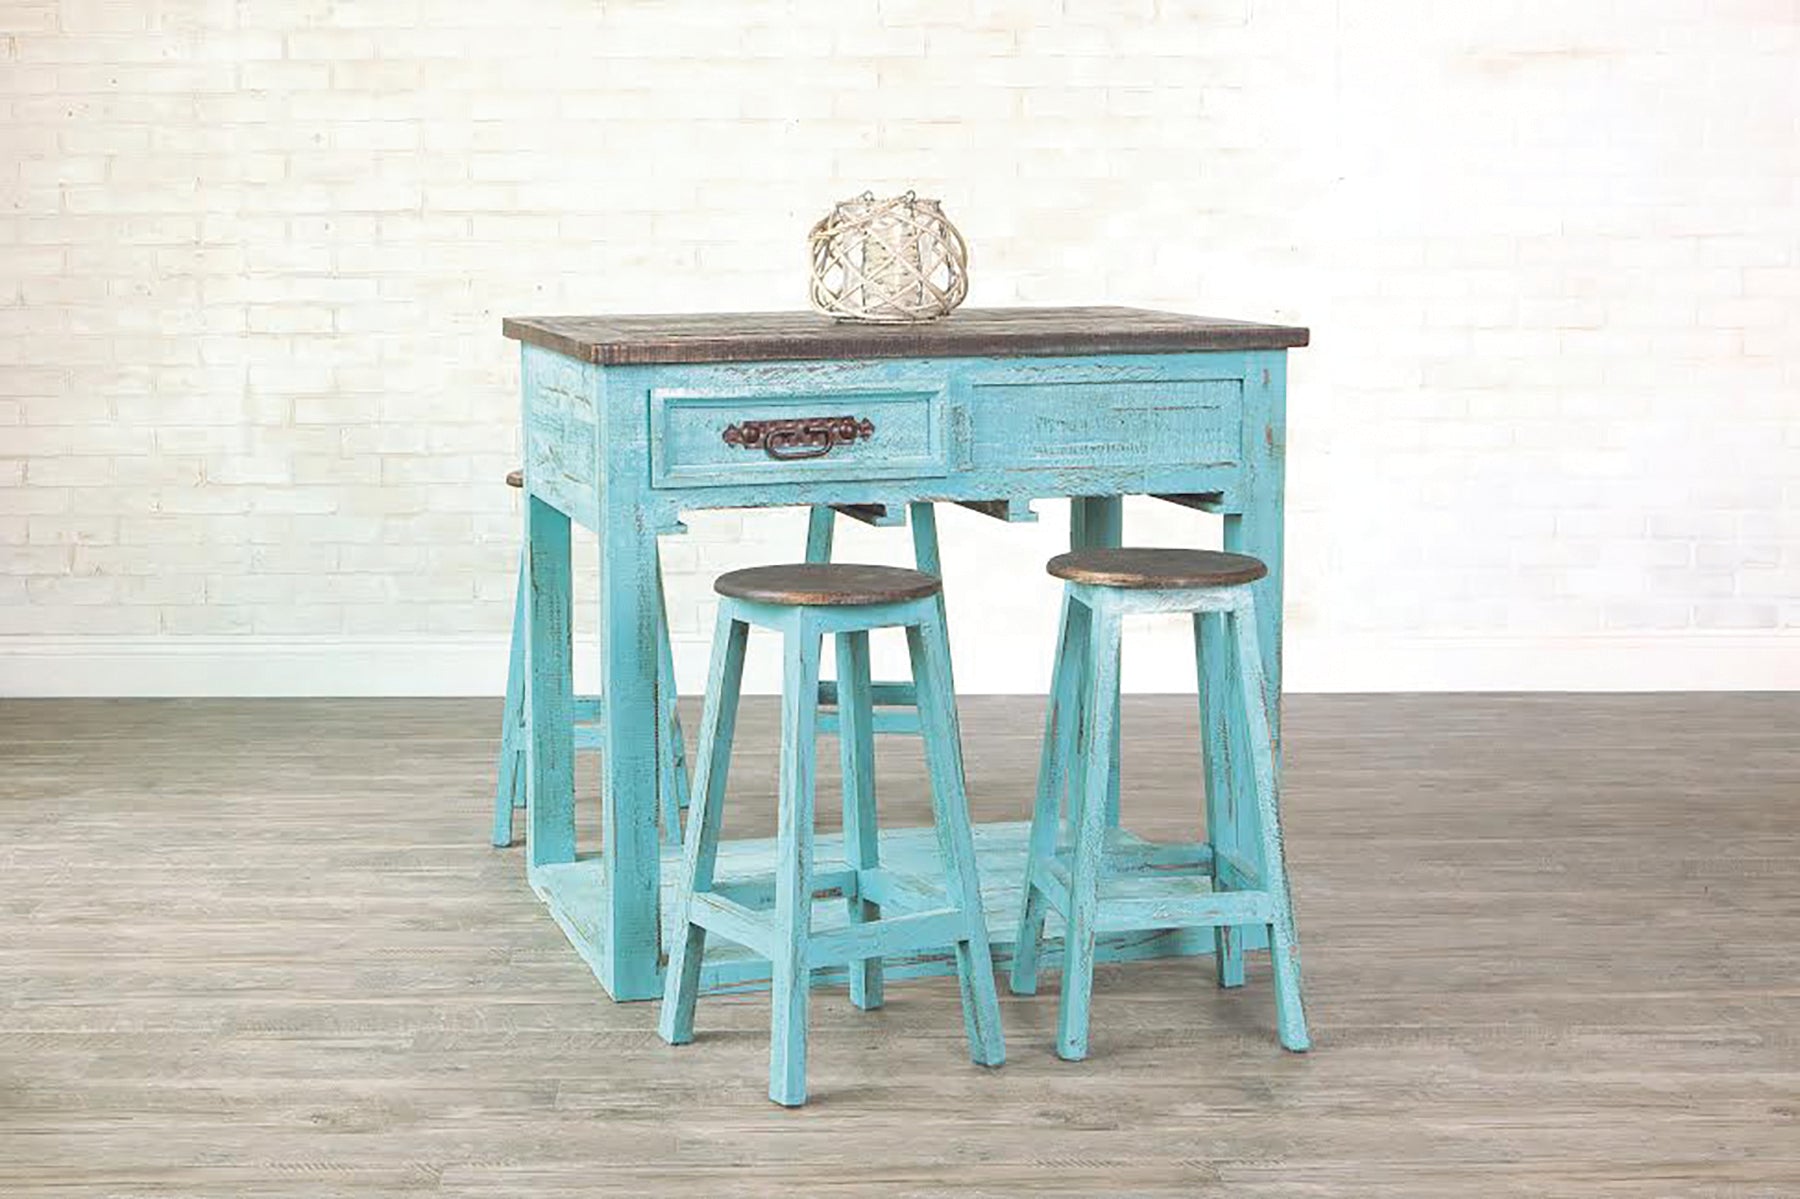 LTMES33 KITCHEN ISLAND IN Turquoise ?v=1551799844